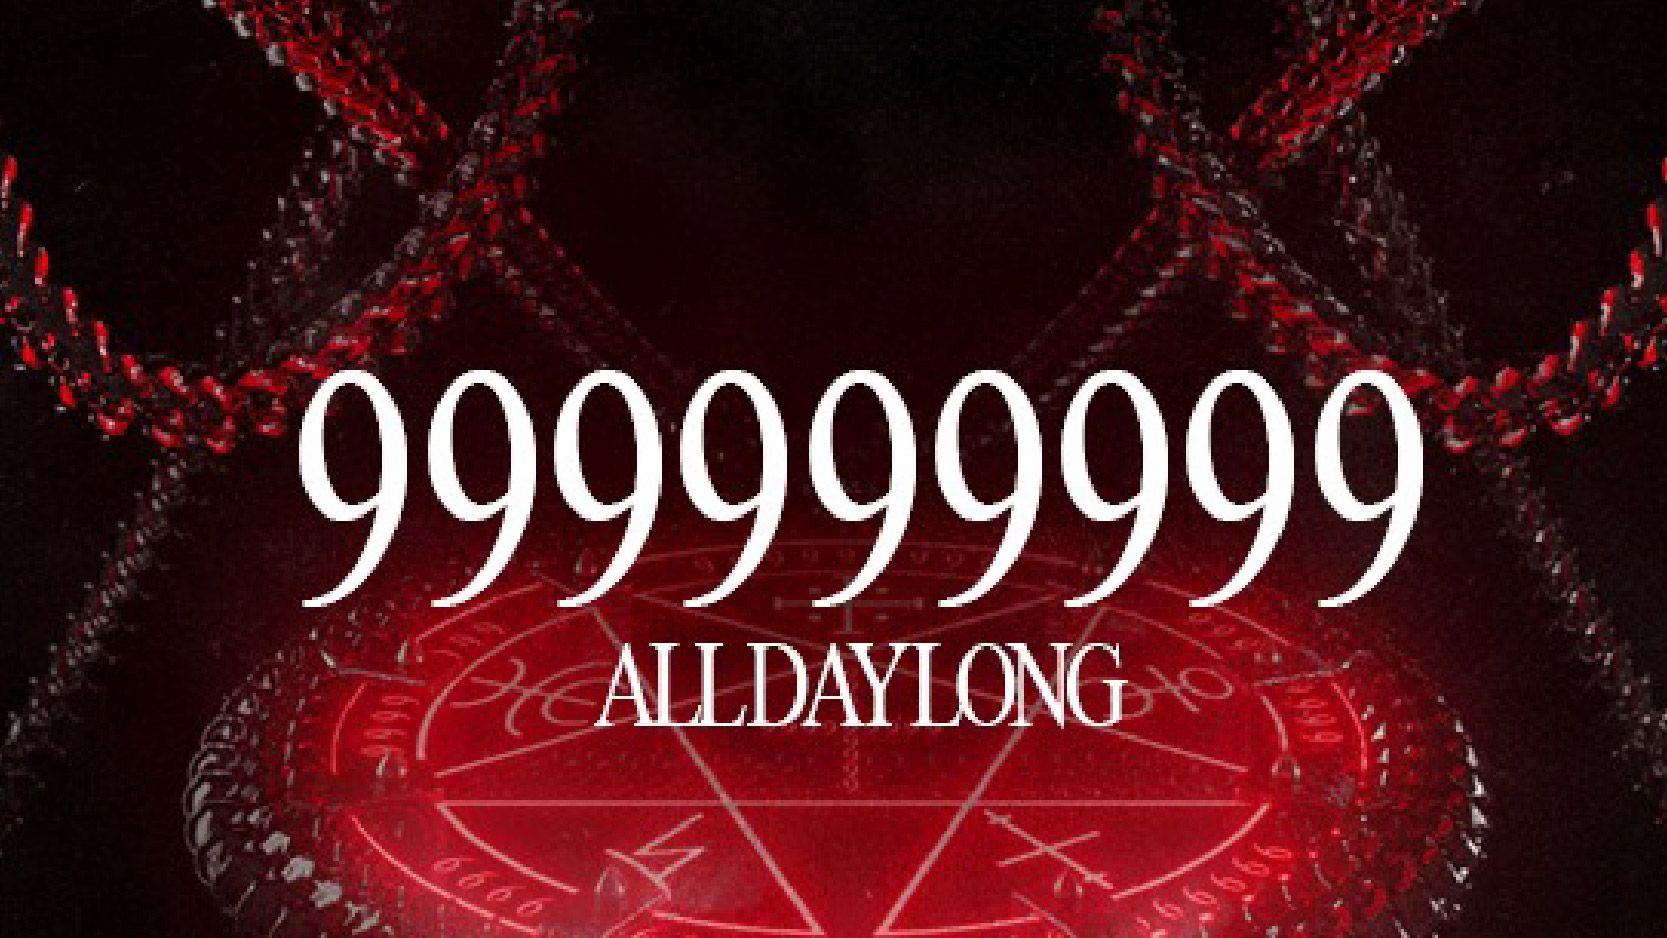 Unreal x FYM: 999999999 All Day Long cover